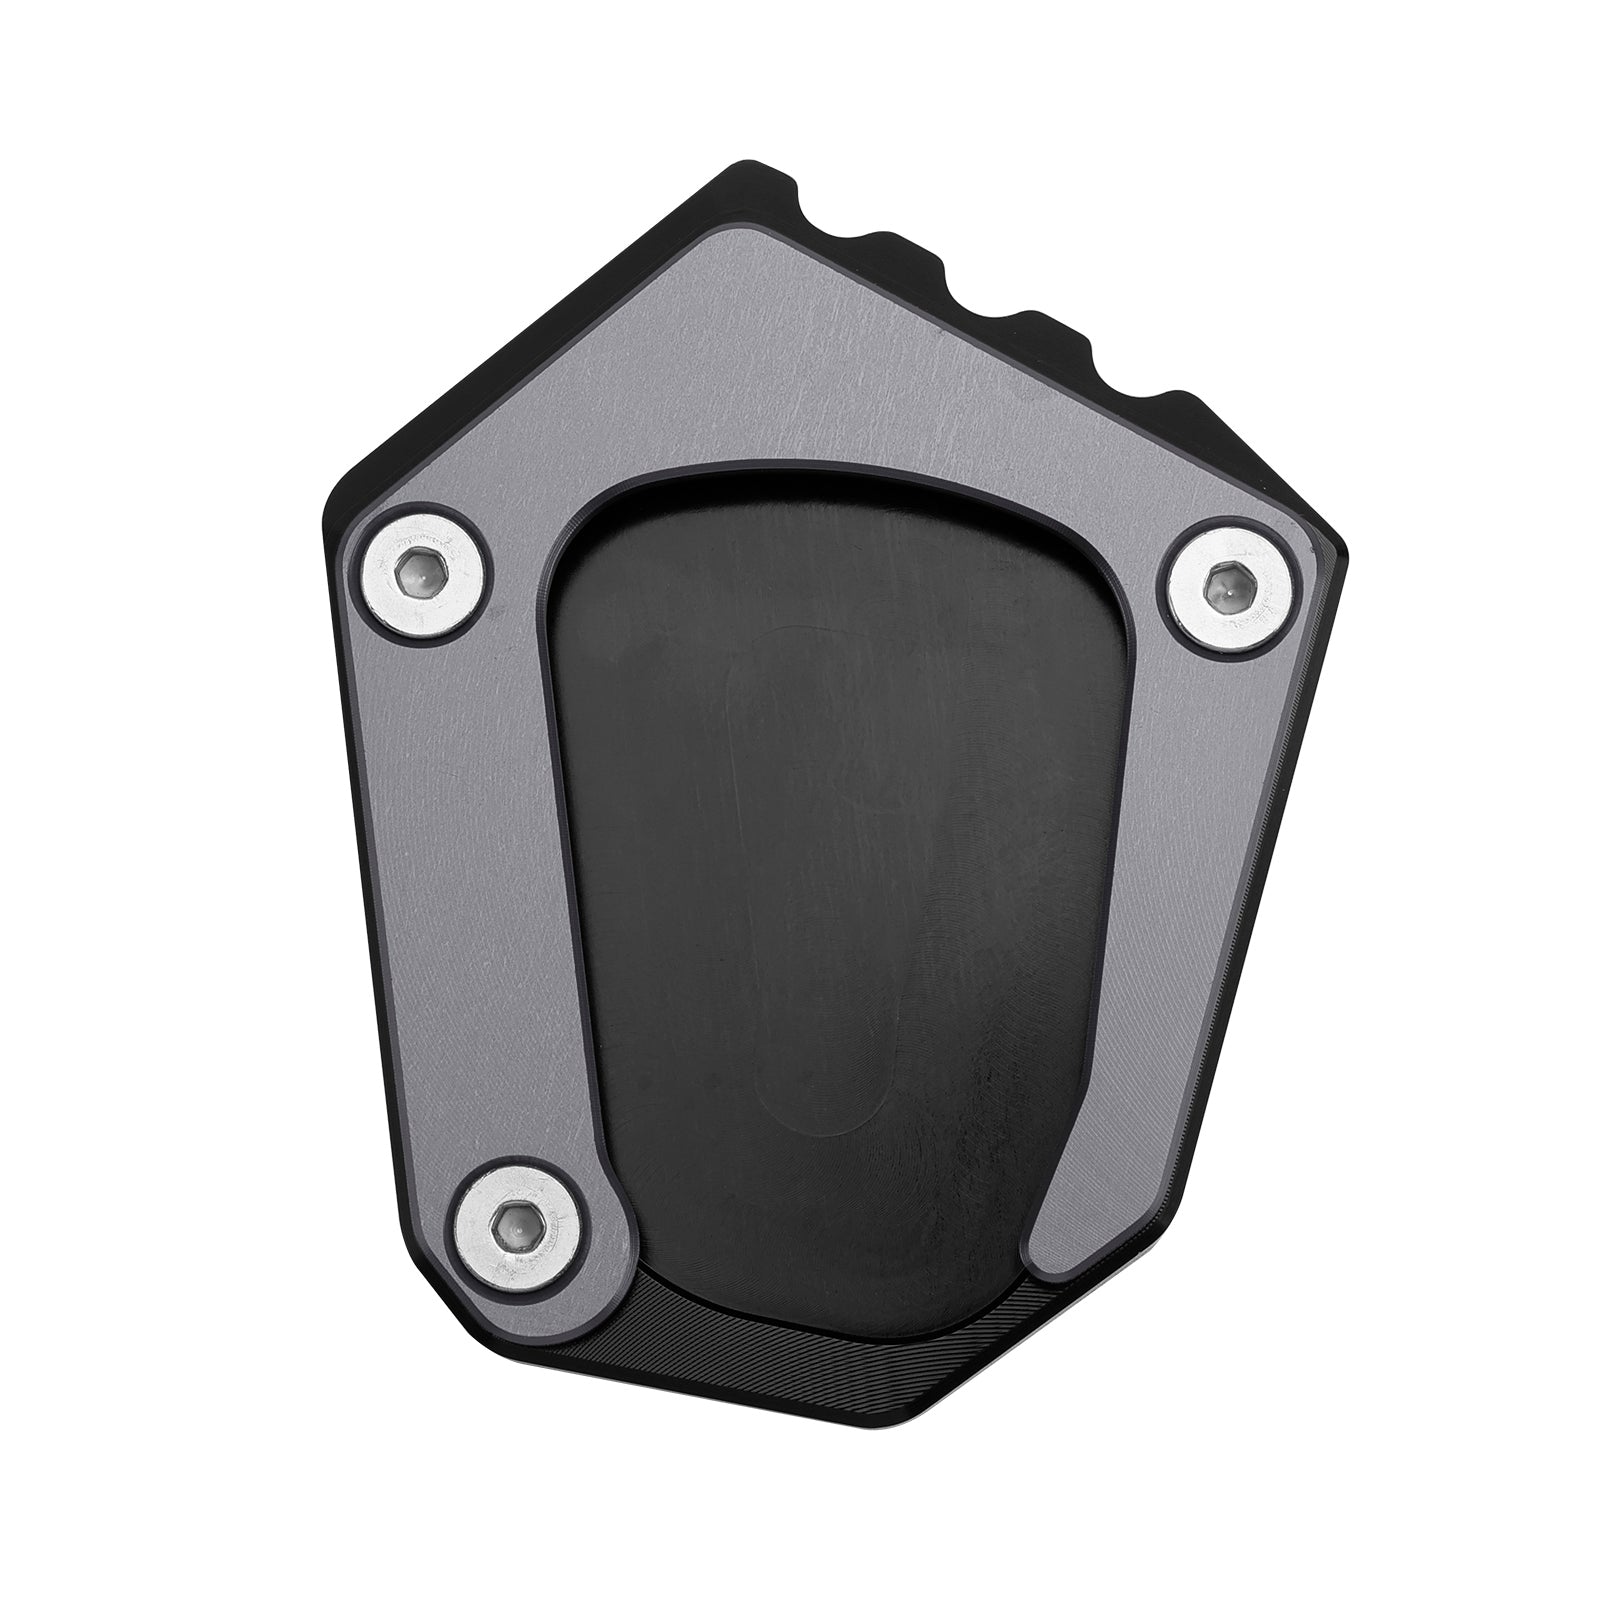 Kickstand Enlarge Plate Pad fit for BMW K1600 2016-2022